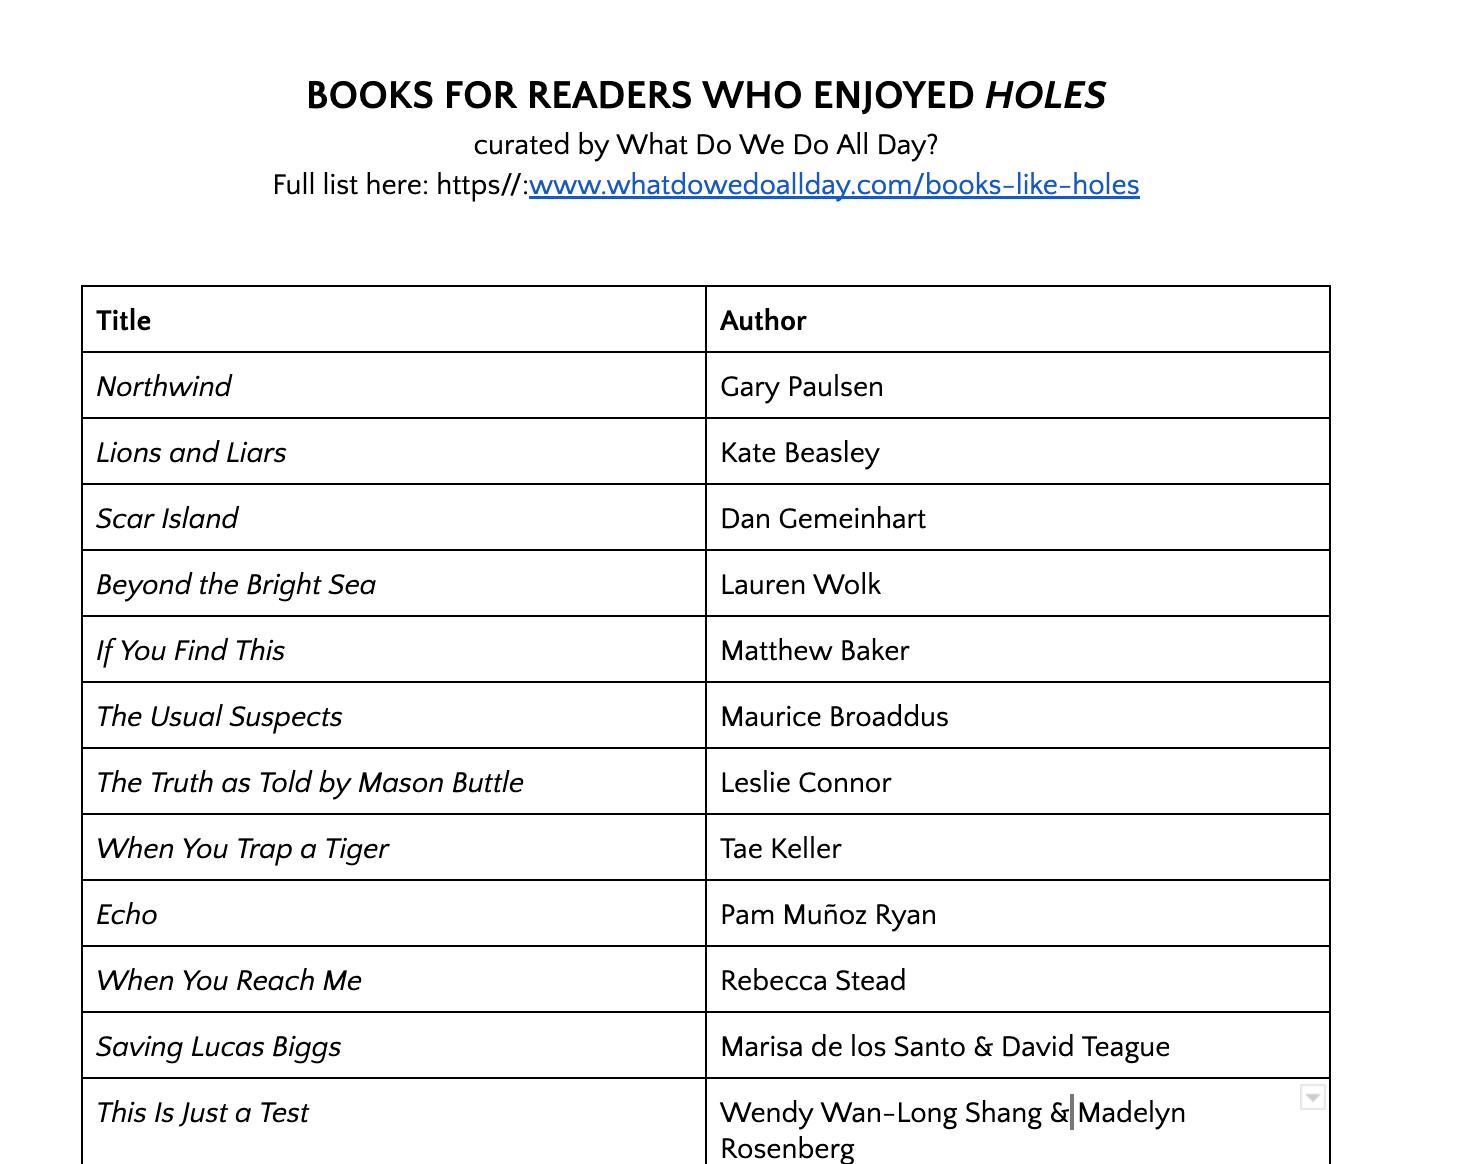 Books Like Holes: 17 Imaginative Next-Reads for Tweens